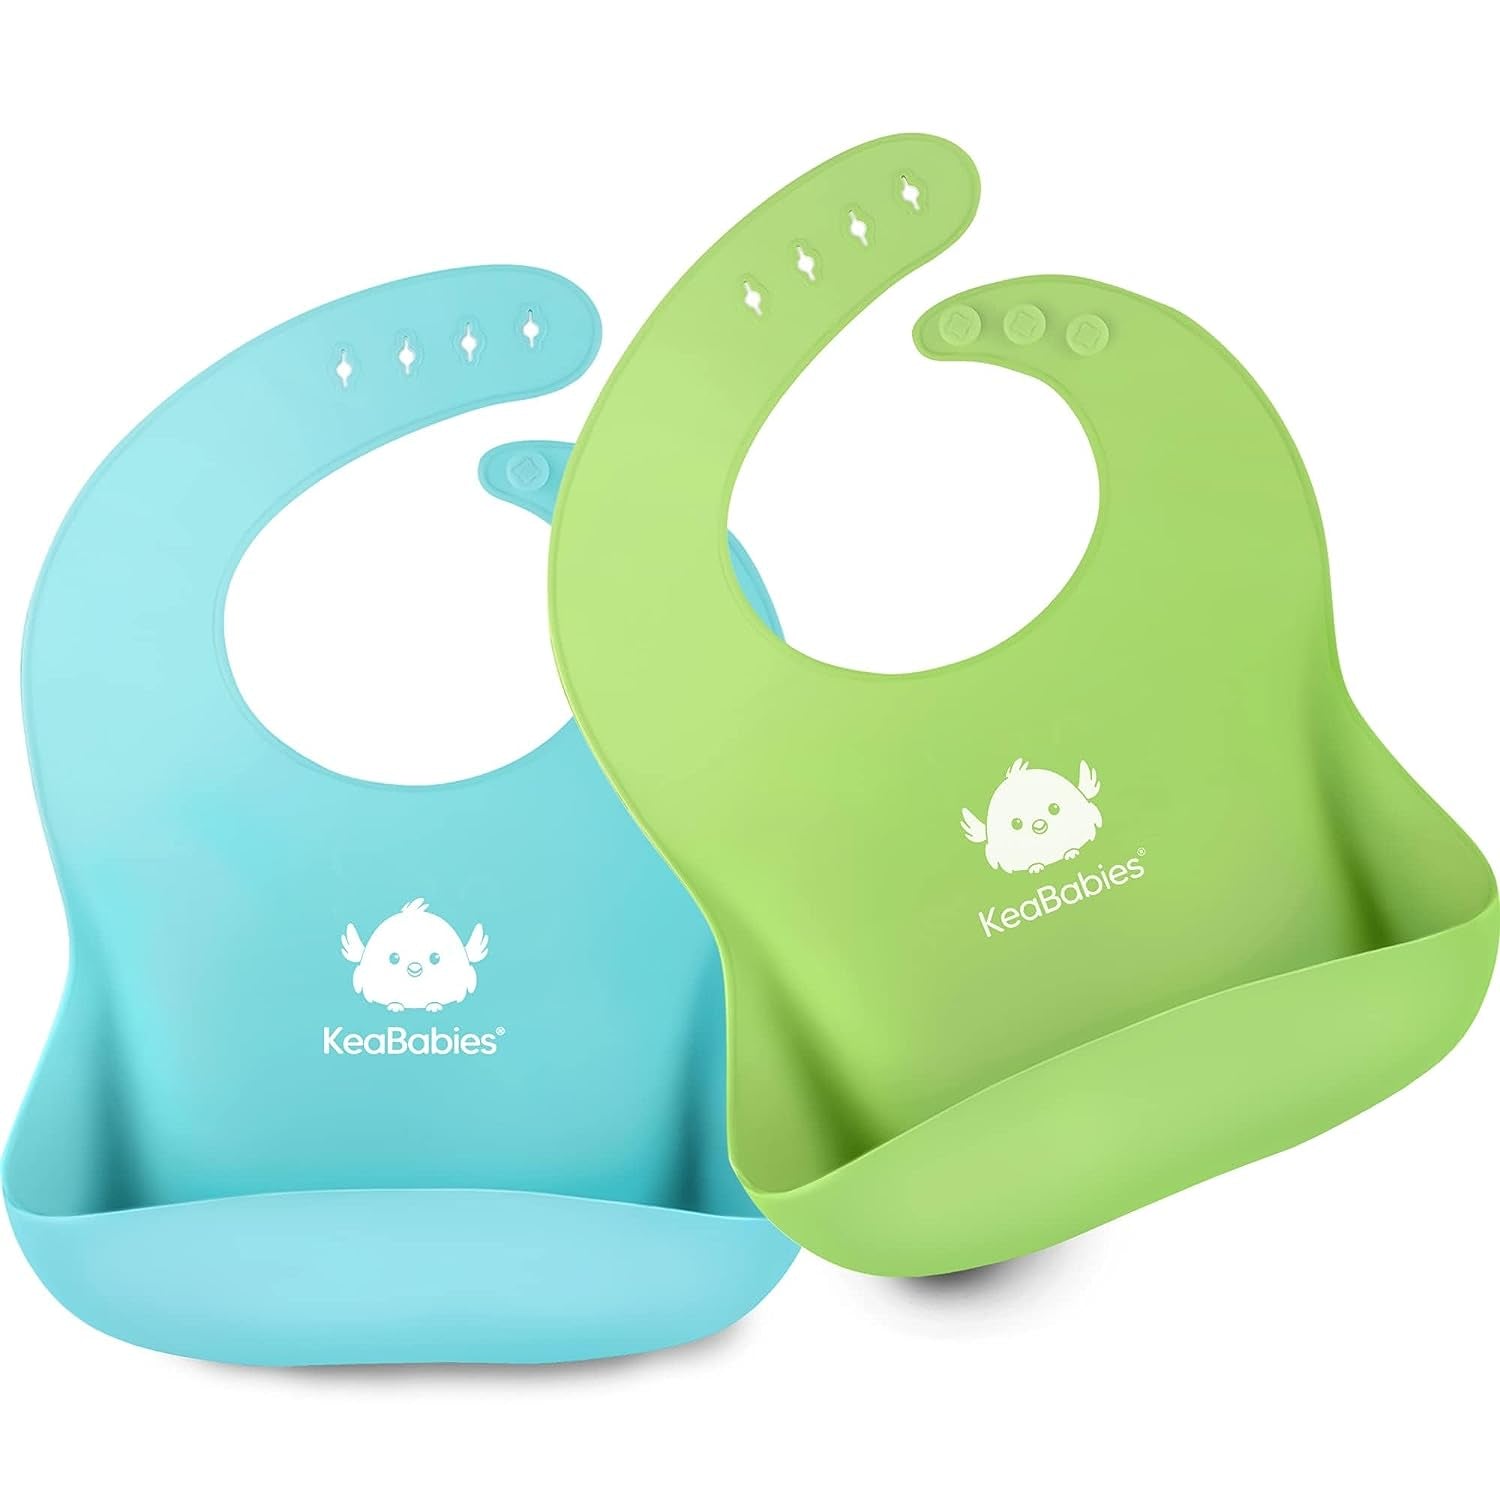 2-Pack Silicone Bibs for Babies, Silicone Baby Bibs for Eating, Food-Grade Pure Silicone Bib, Toddler Bibs, Waterproof Bibs, Feeding Bibs, Silicon Bibs for Toddlers, Boys (Cloud Nine)